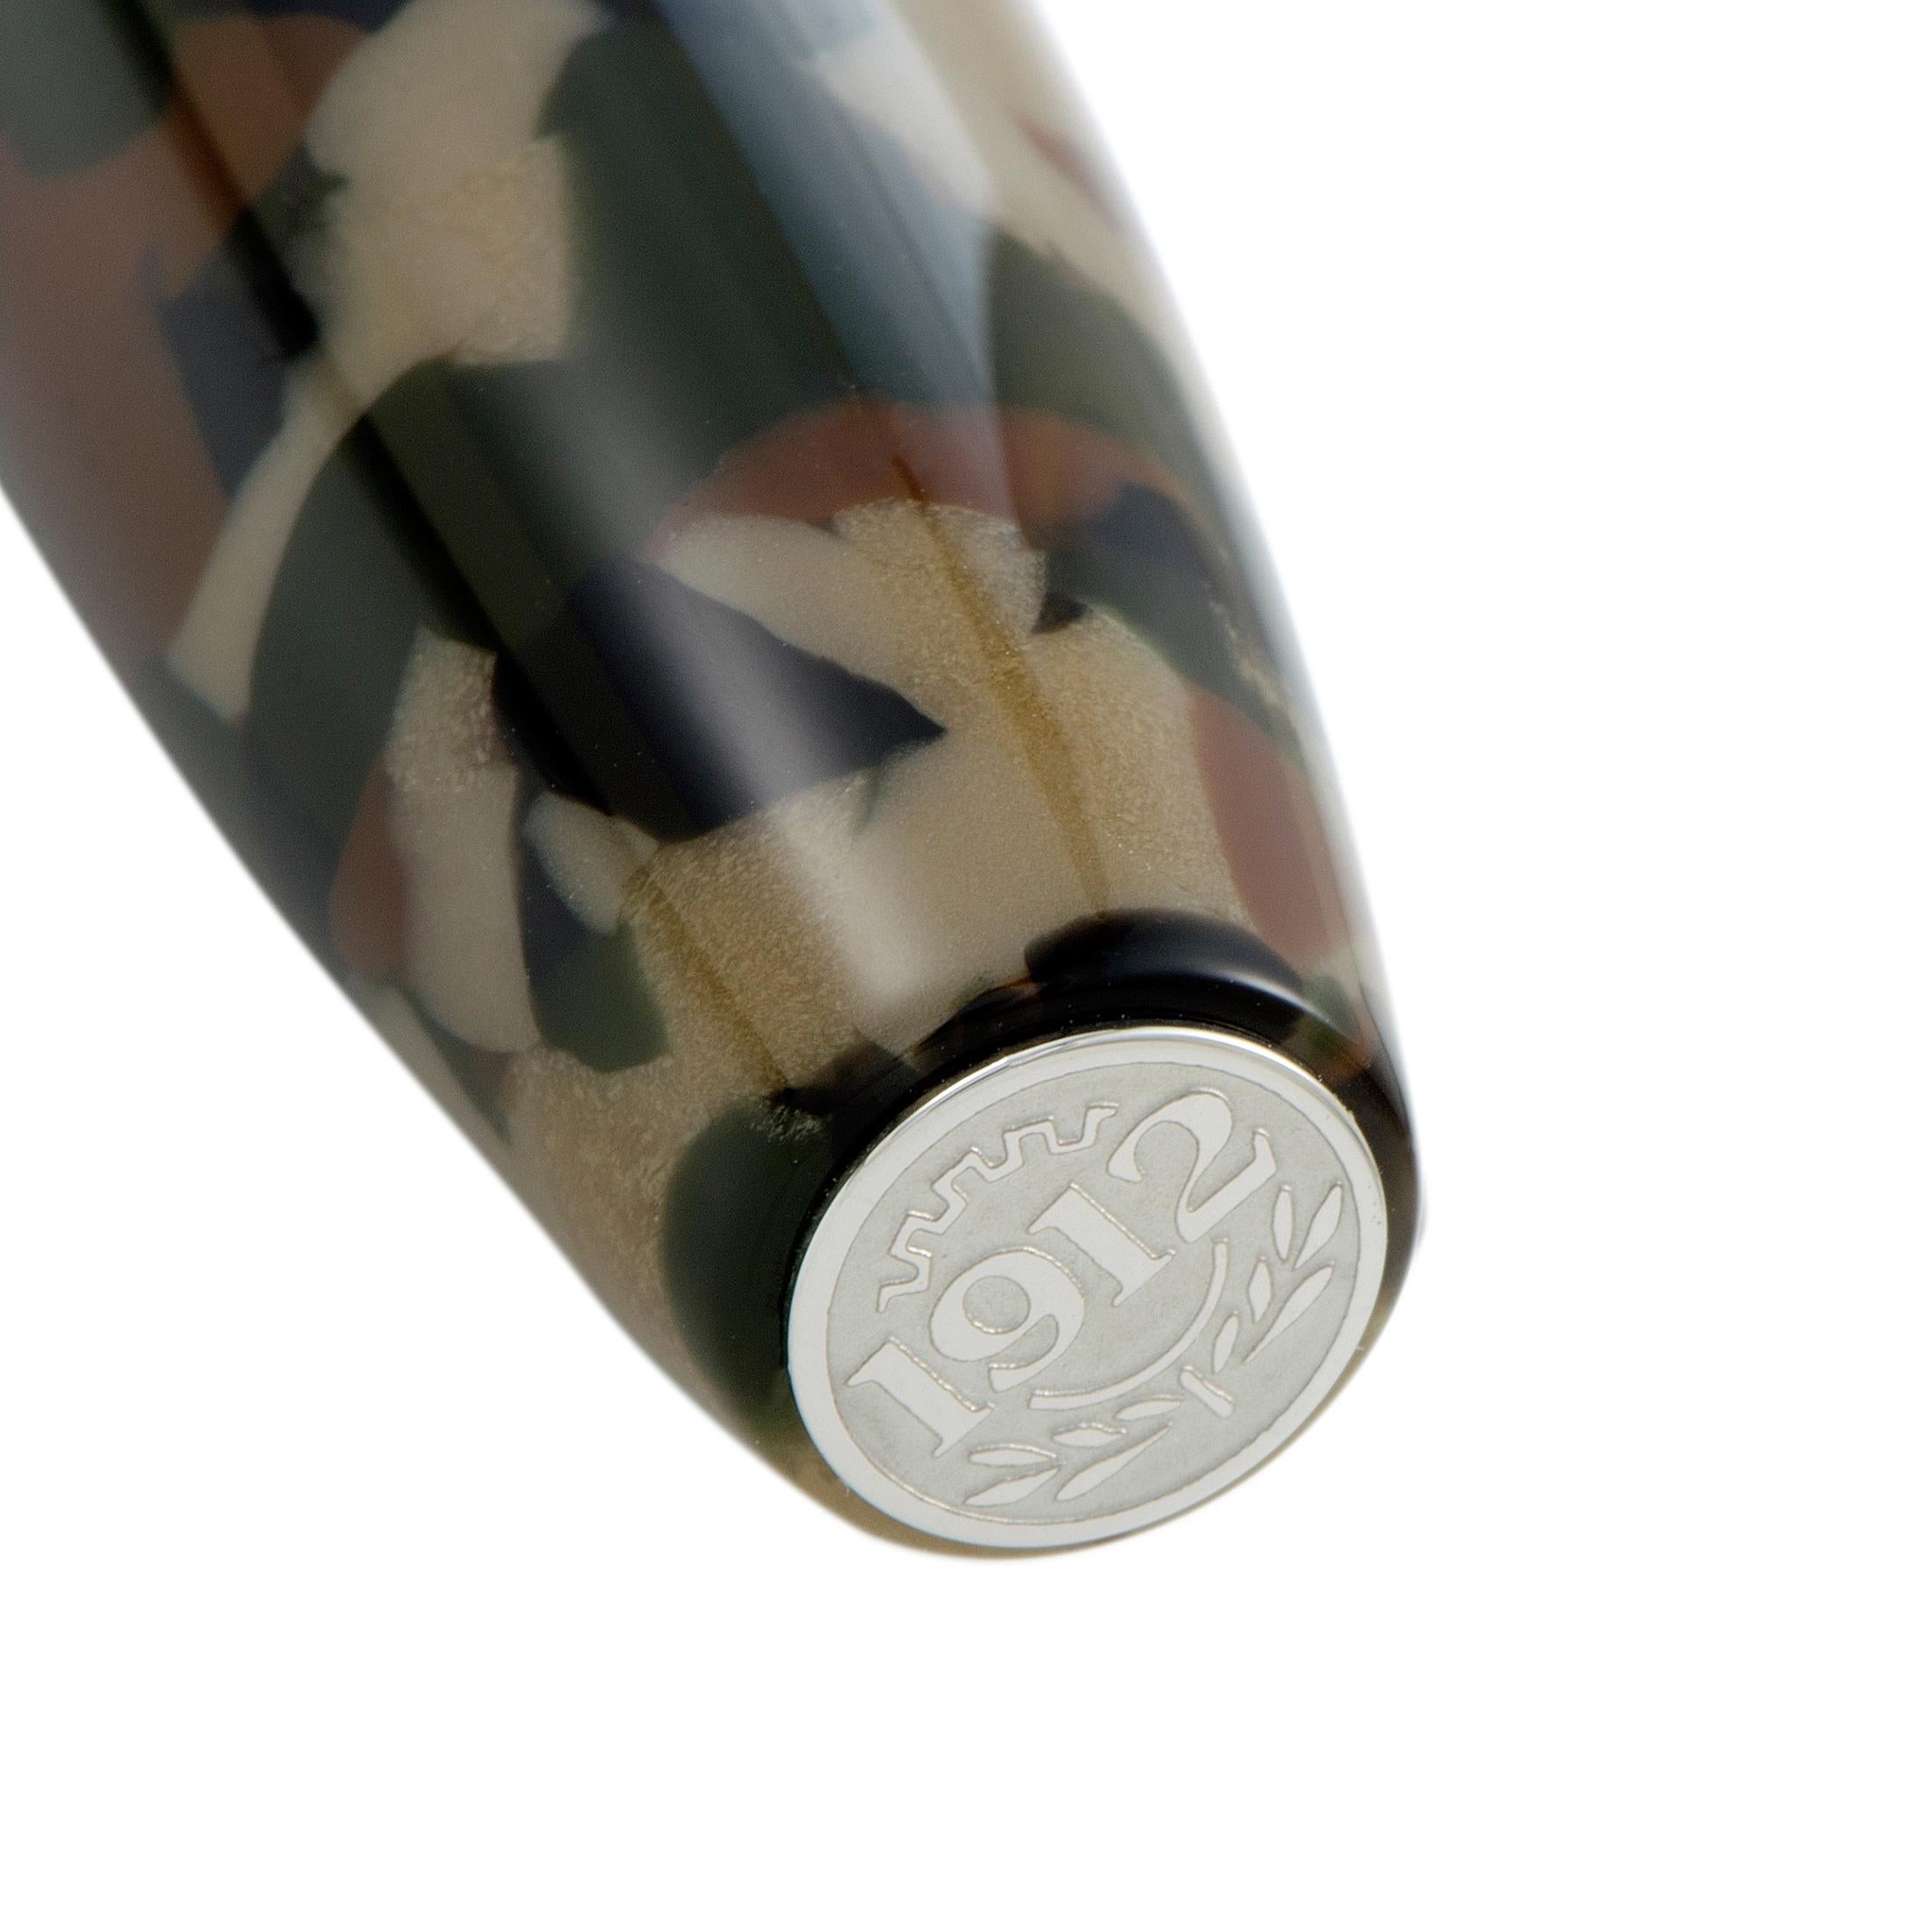 This exceptional ballpoint pen is created by Montegrappa for the exquisite “Fortuna” series and it boasts the compelling camouflage pattern that gives an incredibly masculine appeal to the pen. The cap top has the number “1912” engraved, the year